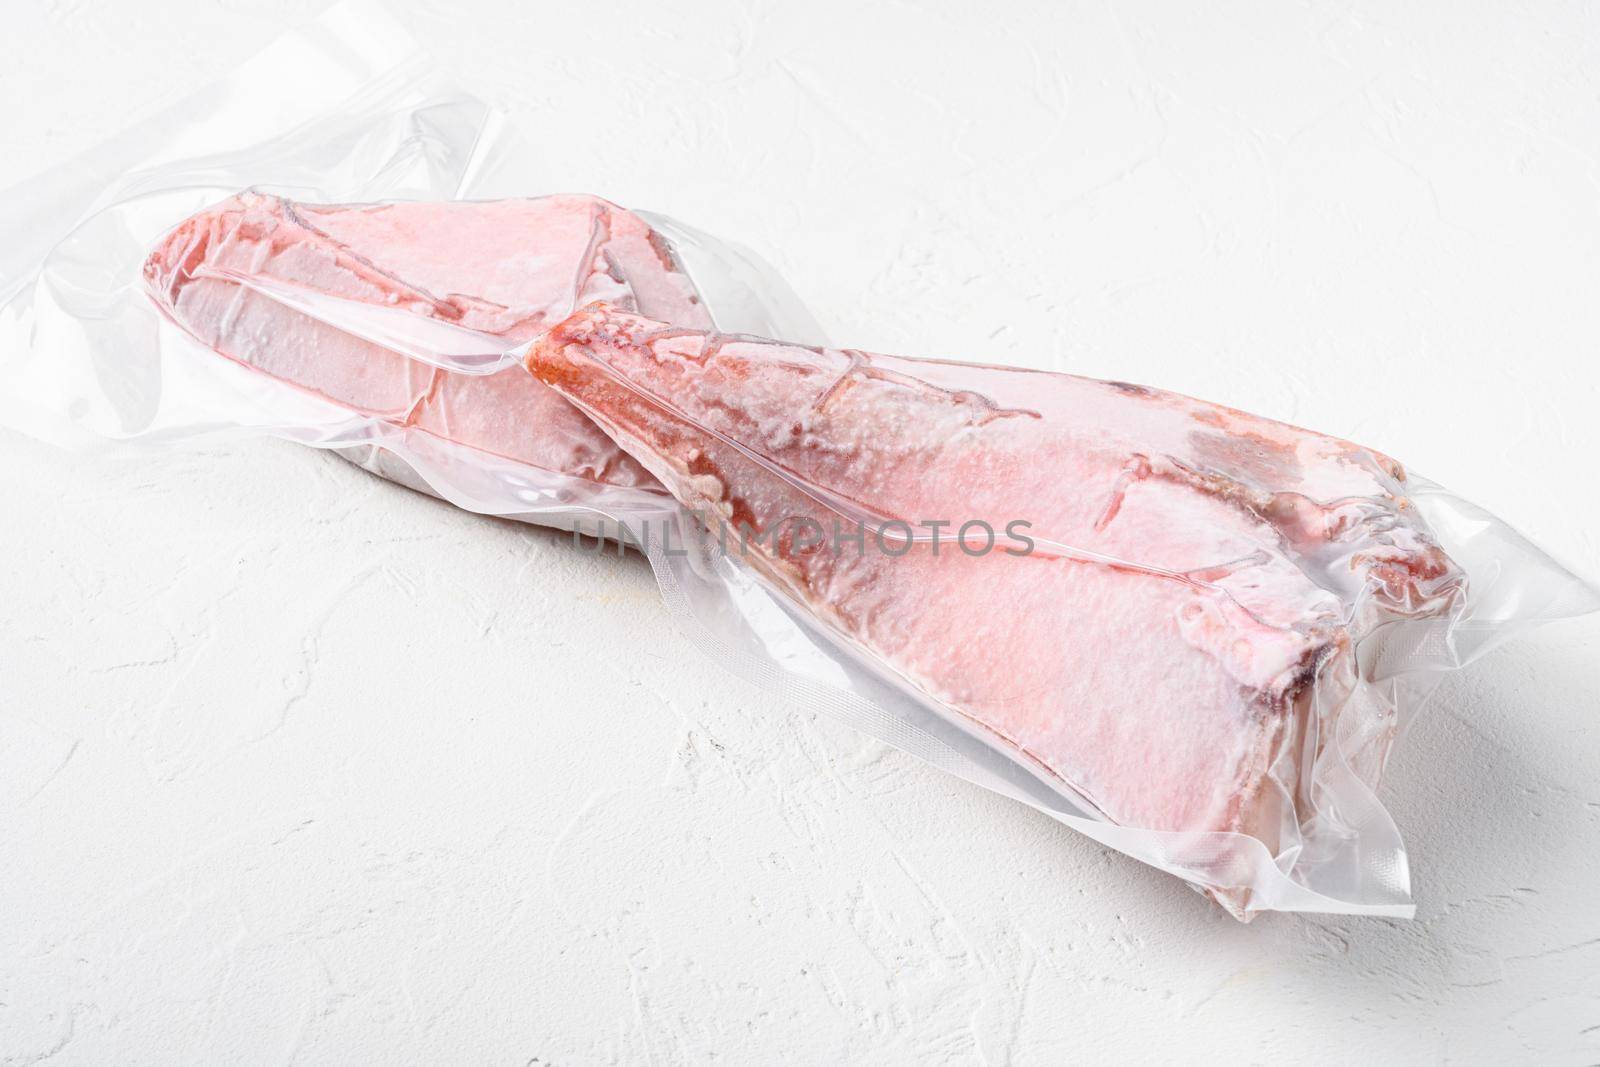 Sea bass frozen pack fish meat set, on white stone table background, with copy space for text